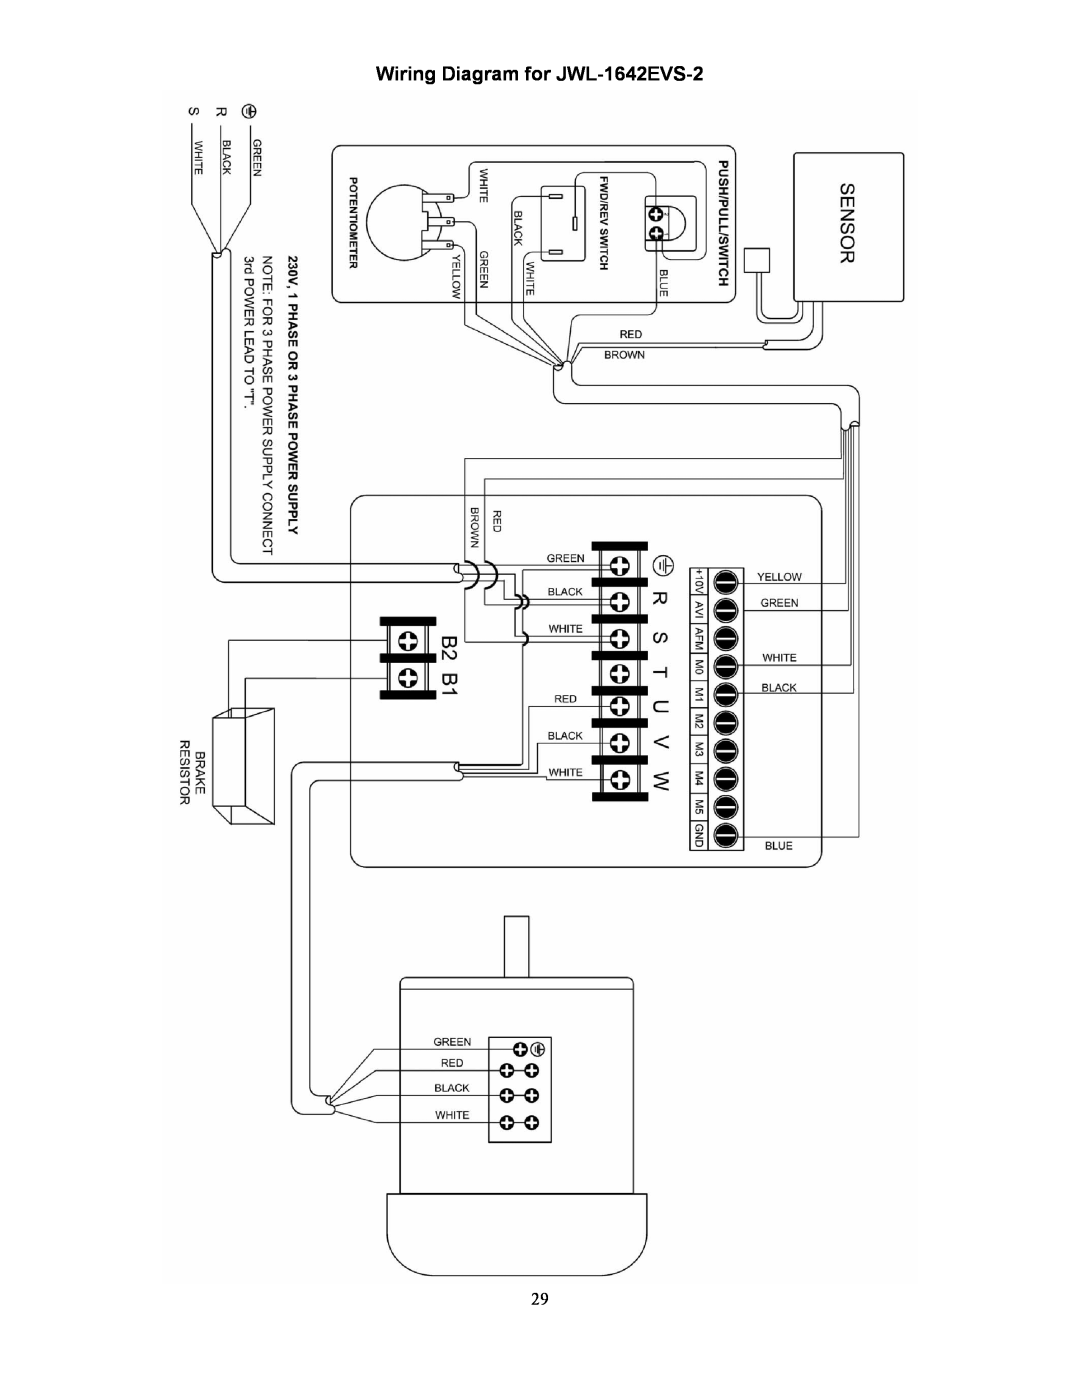 Jet Tools operating instructions Wiring Diagram for JWL-1642EVS-2 